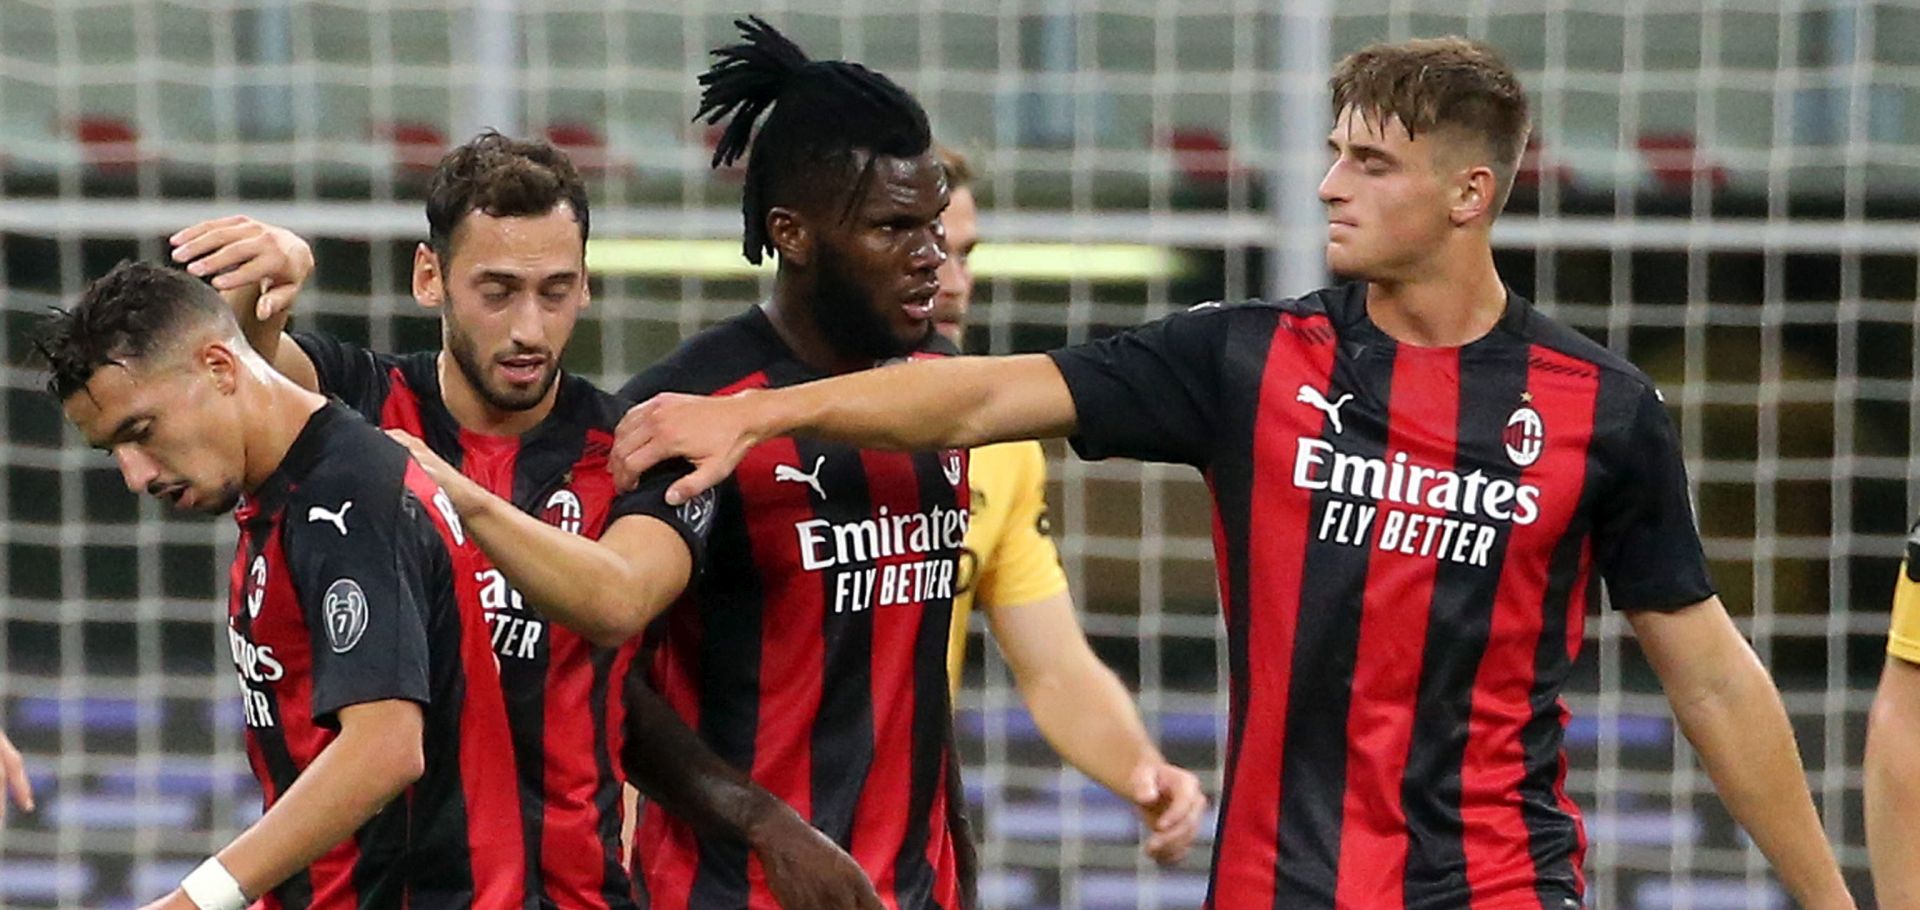 epa08694550 AC Milan's Hakan Calhanoglu (2L) celebrates with his teammates after scoring the 1-1 equalizer during the UEFA Europa League third qualifying round soccer match AC Milan vs Fk Bodo/Glimt at Giuseppe Meazza stadium in Milan, Italy, 24 September  2020.  EPA/MATTEO BAZZI